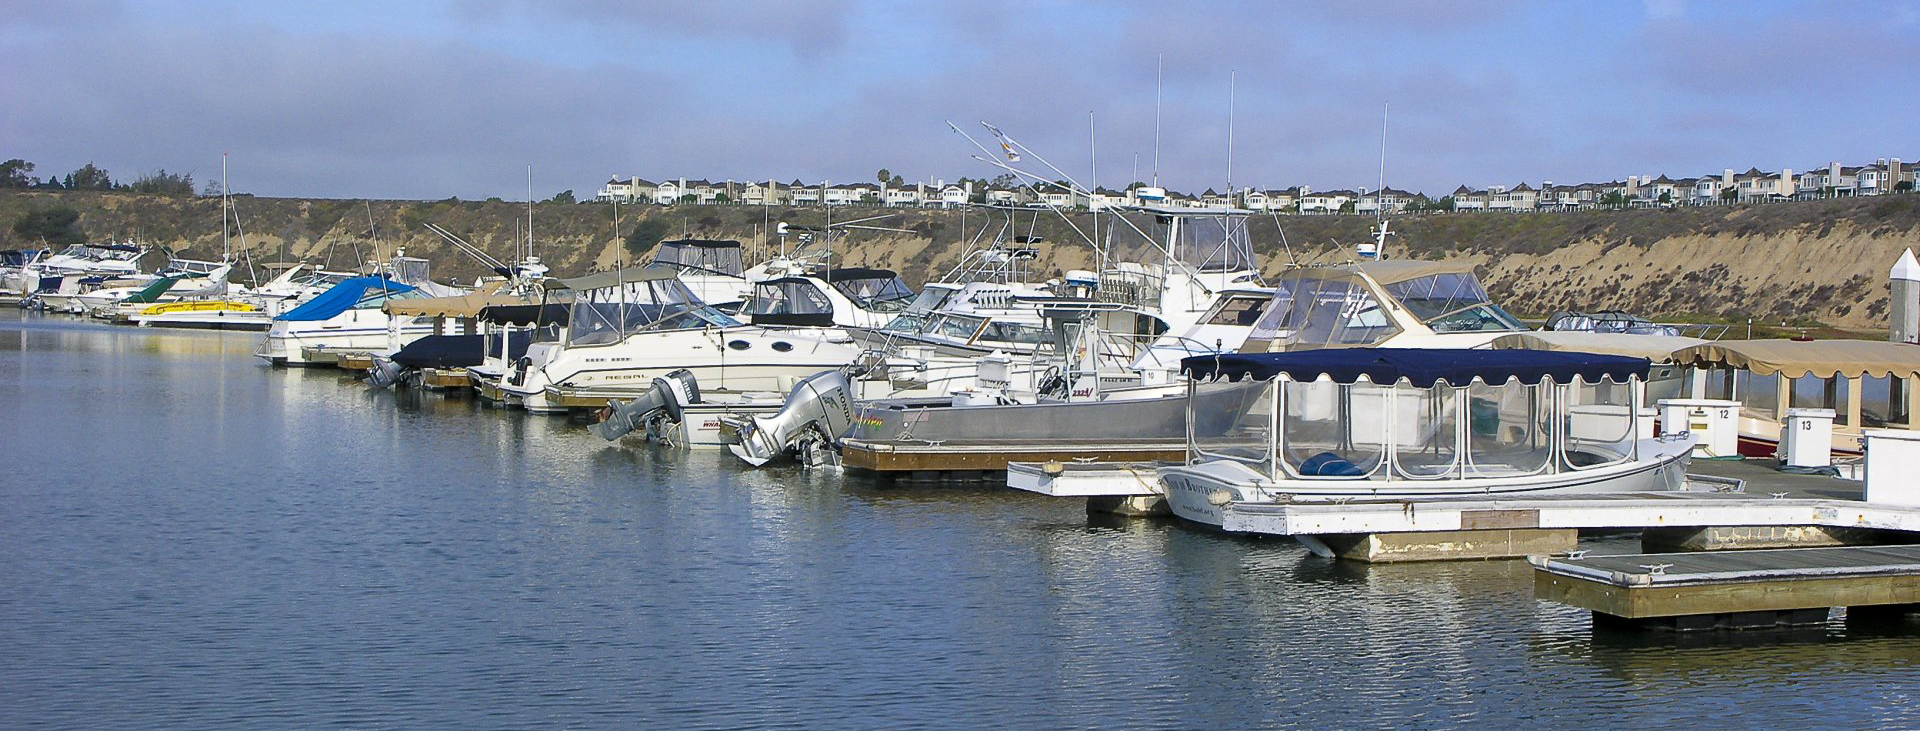 Boats slipped in marina with houses on bluffs in the background